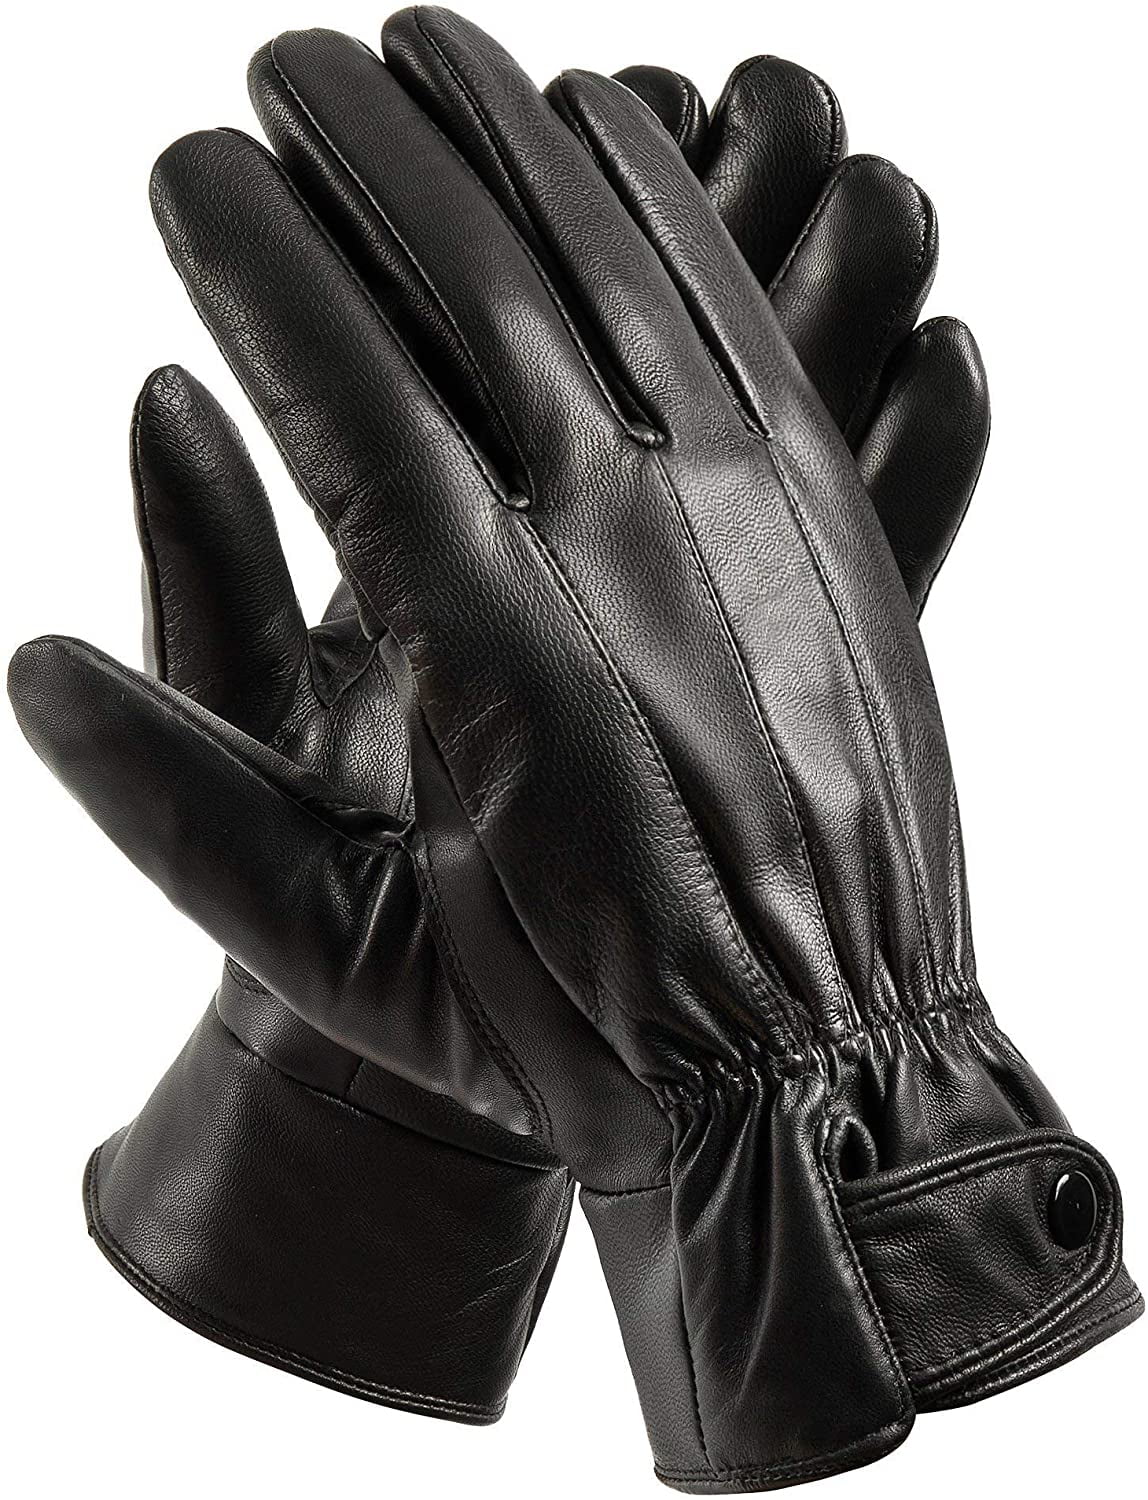 REAL LEATHER MEN GLOVES THERMAL THINSULATE LINED DRIVING SOFT WARM WINTER 